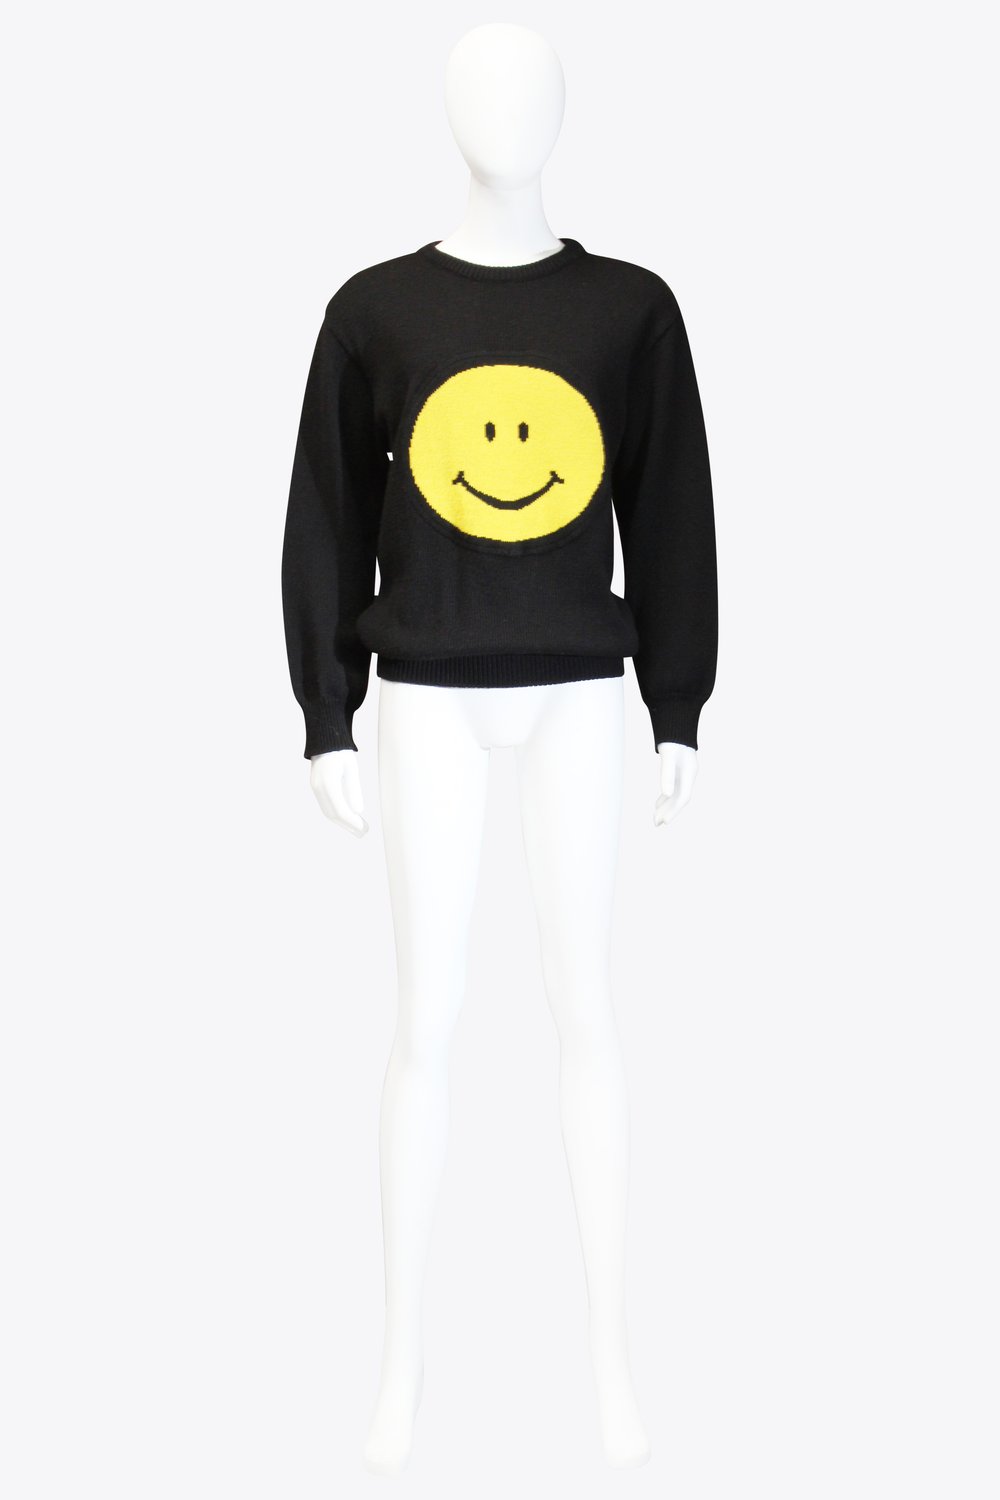 Moschino Cheap & Chic Black Yellow Smiley Face Sweater